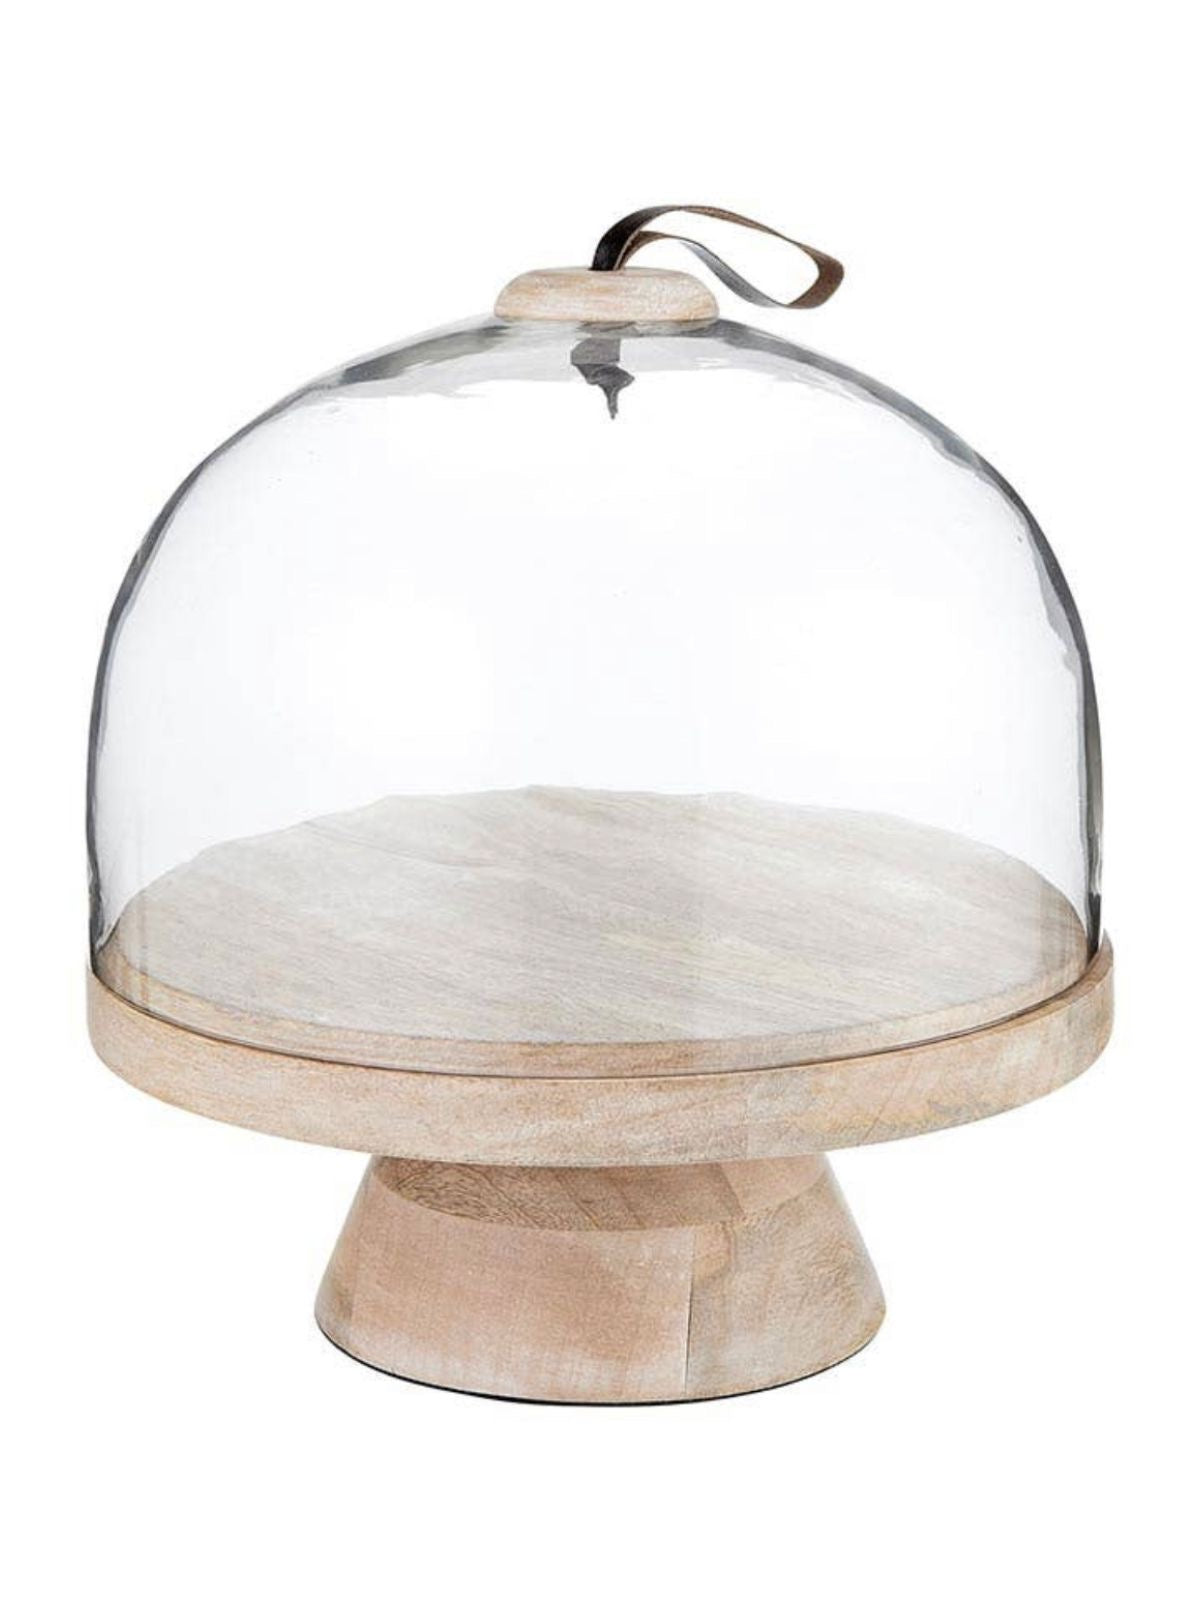 10.5D Mango Wood Pedestal Cake Stand with Glass Dome sold by KYA Home Decor.